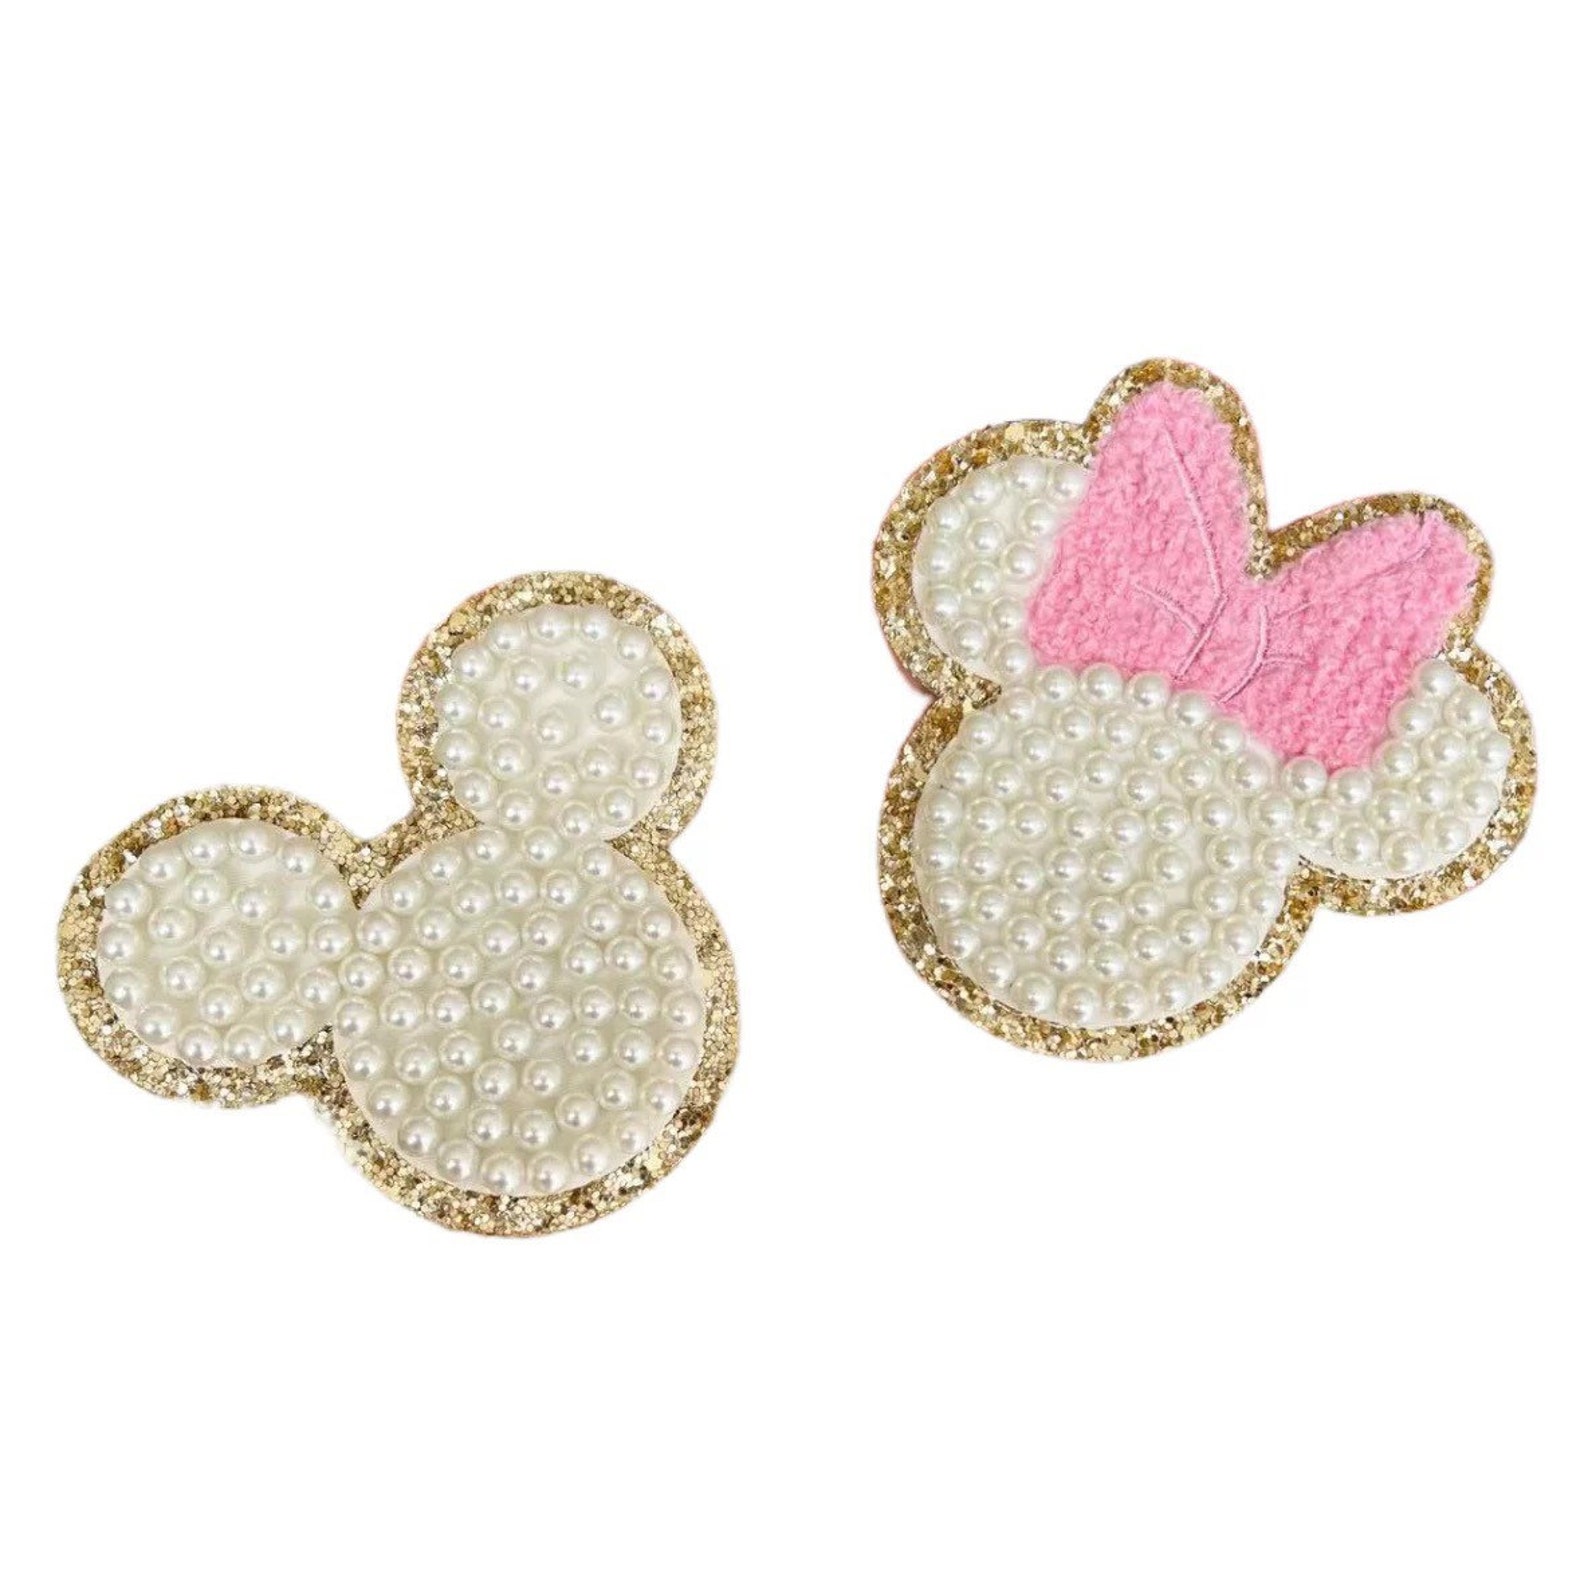 Mickey & Minnie Adhesive Pearl Patches Mickey and Minnie - Etsy